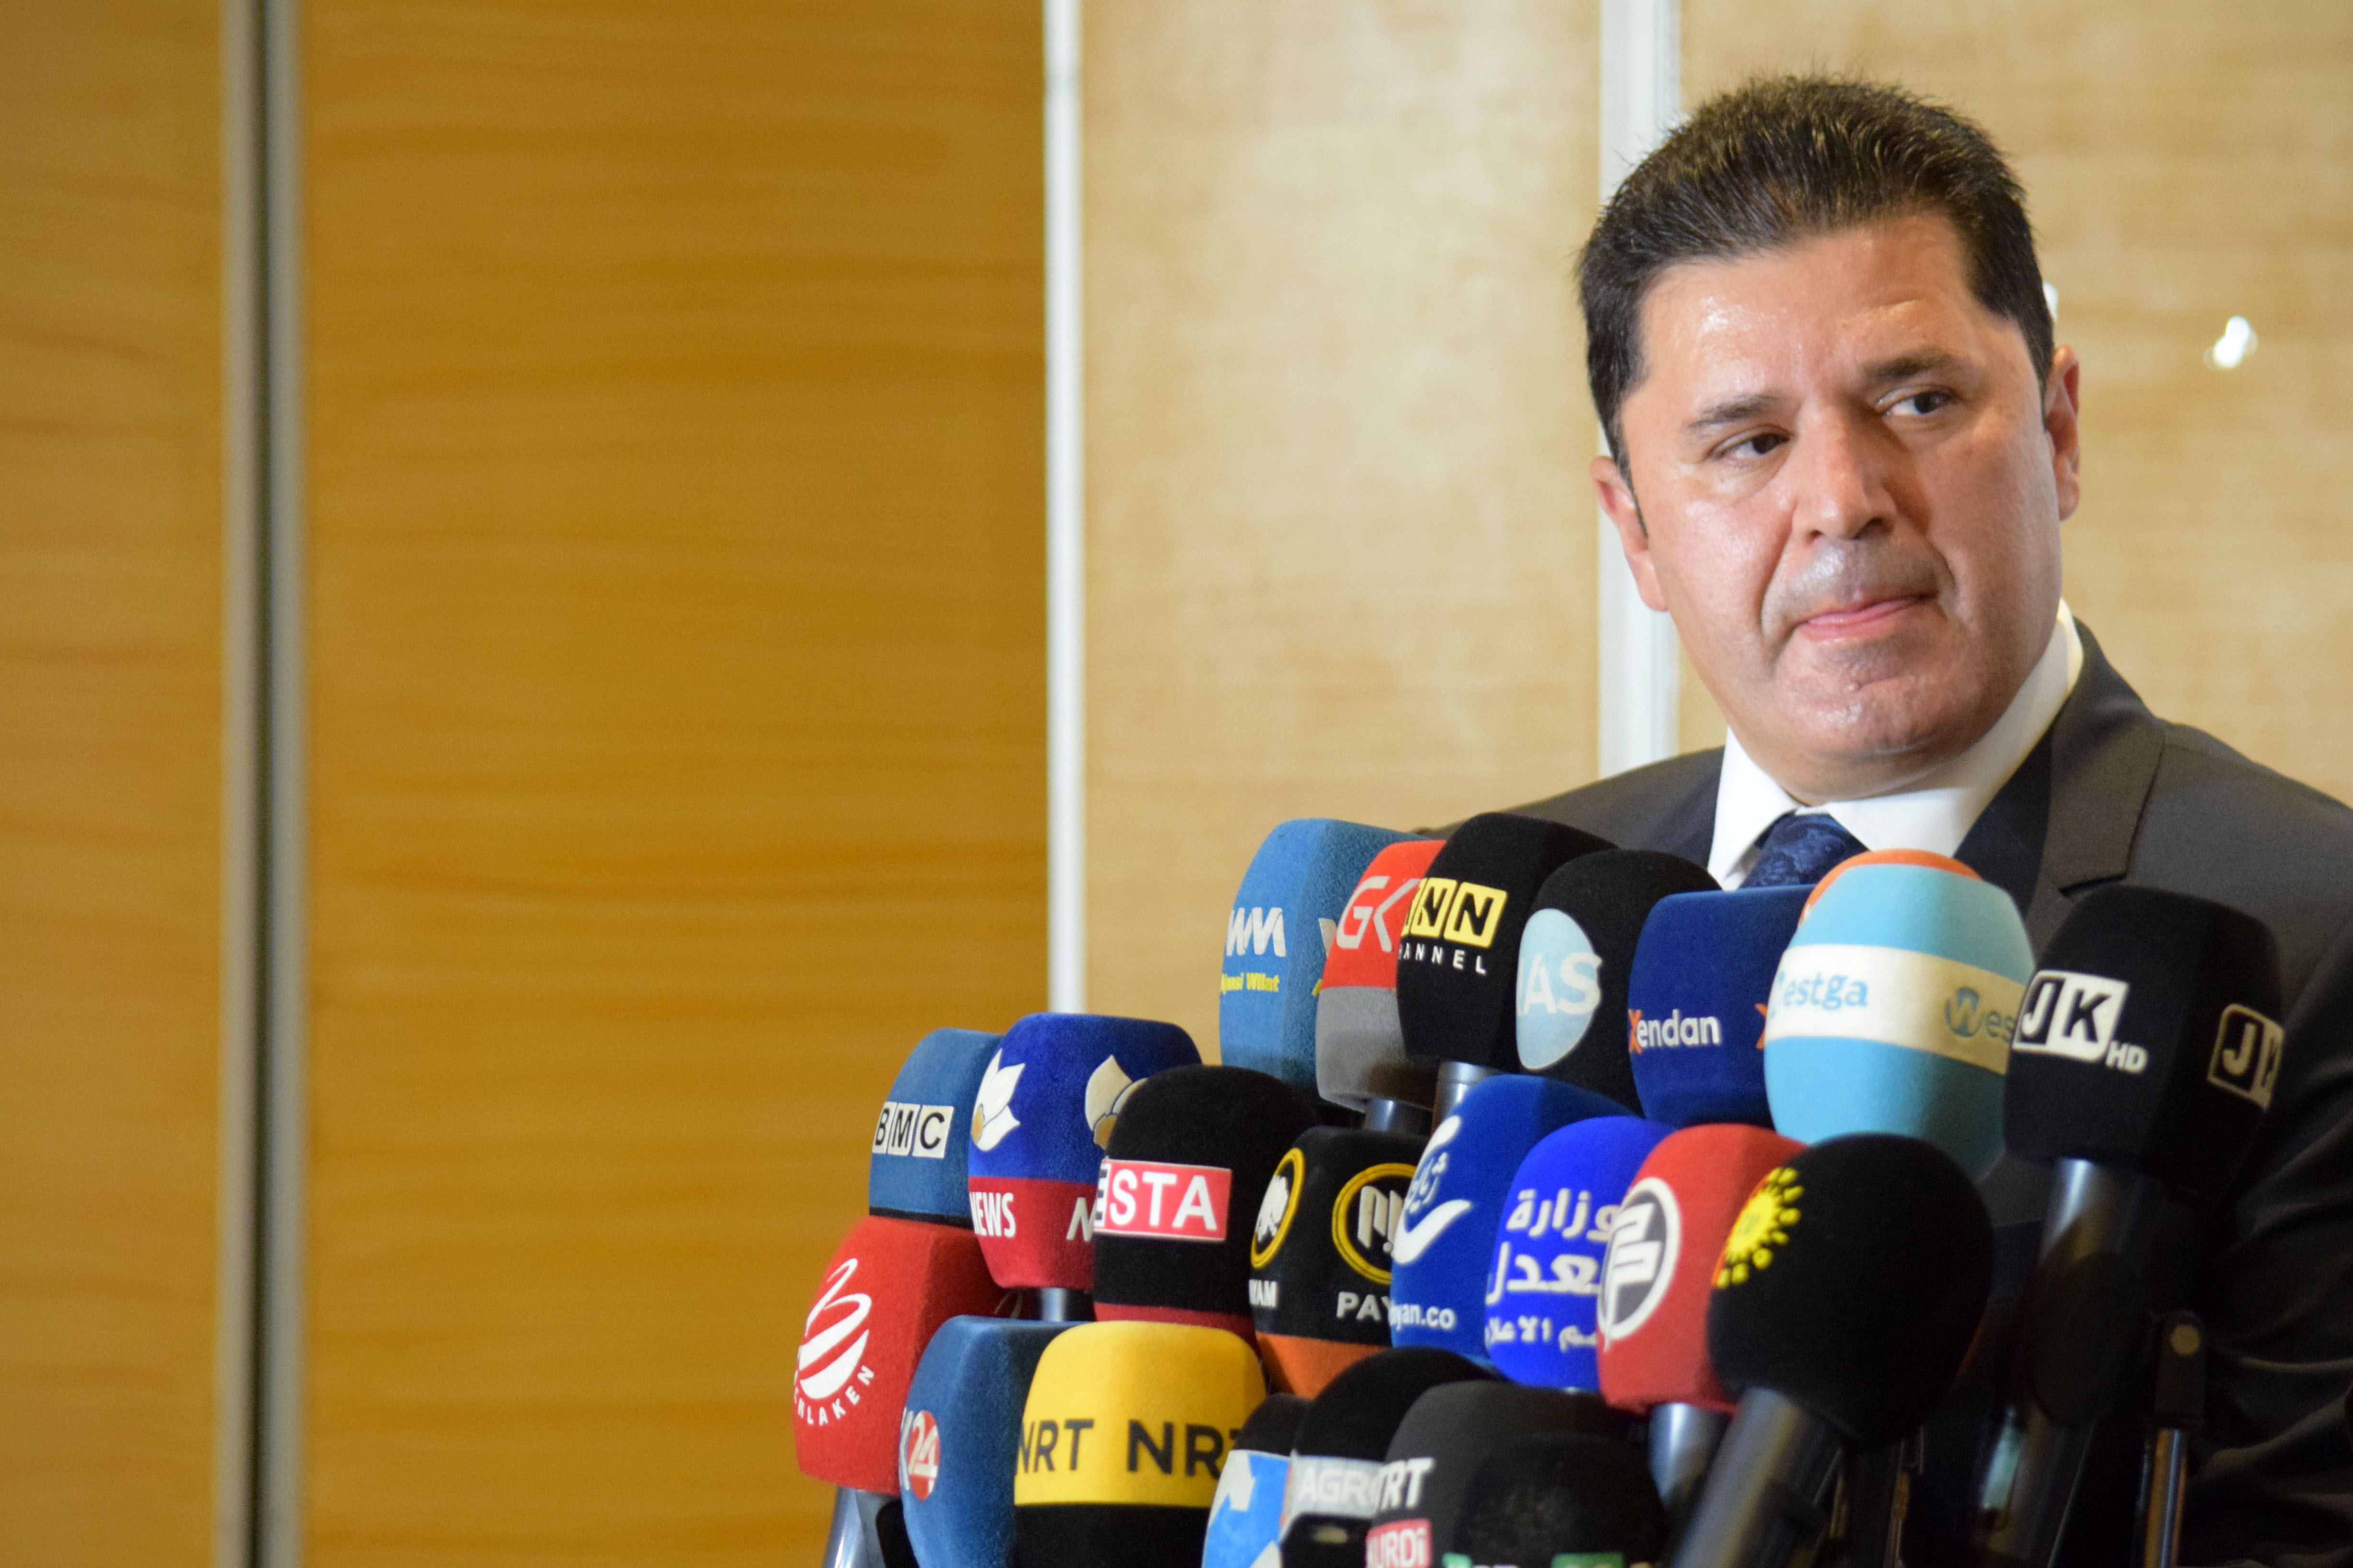 KRG Coordinator for International Advocacy Dindar Zebari stands behind microphones of Kurdish media outlets at a press conference in Sulaymaniyah on May 6, 2021. (Photo: Winthrop Rodgers)